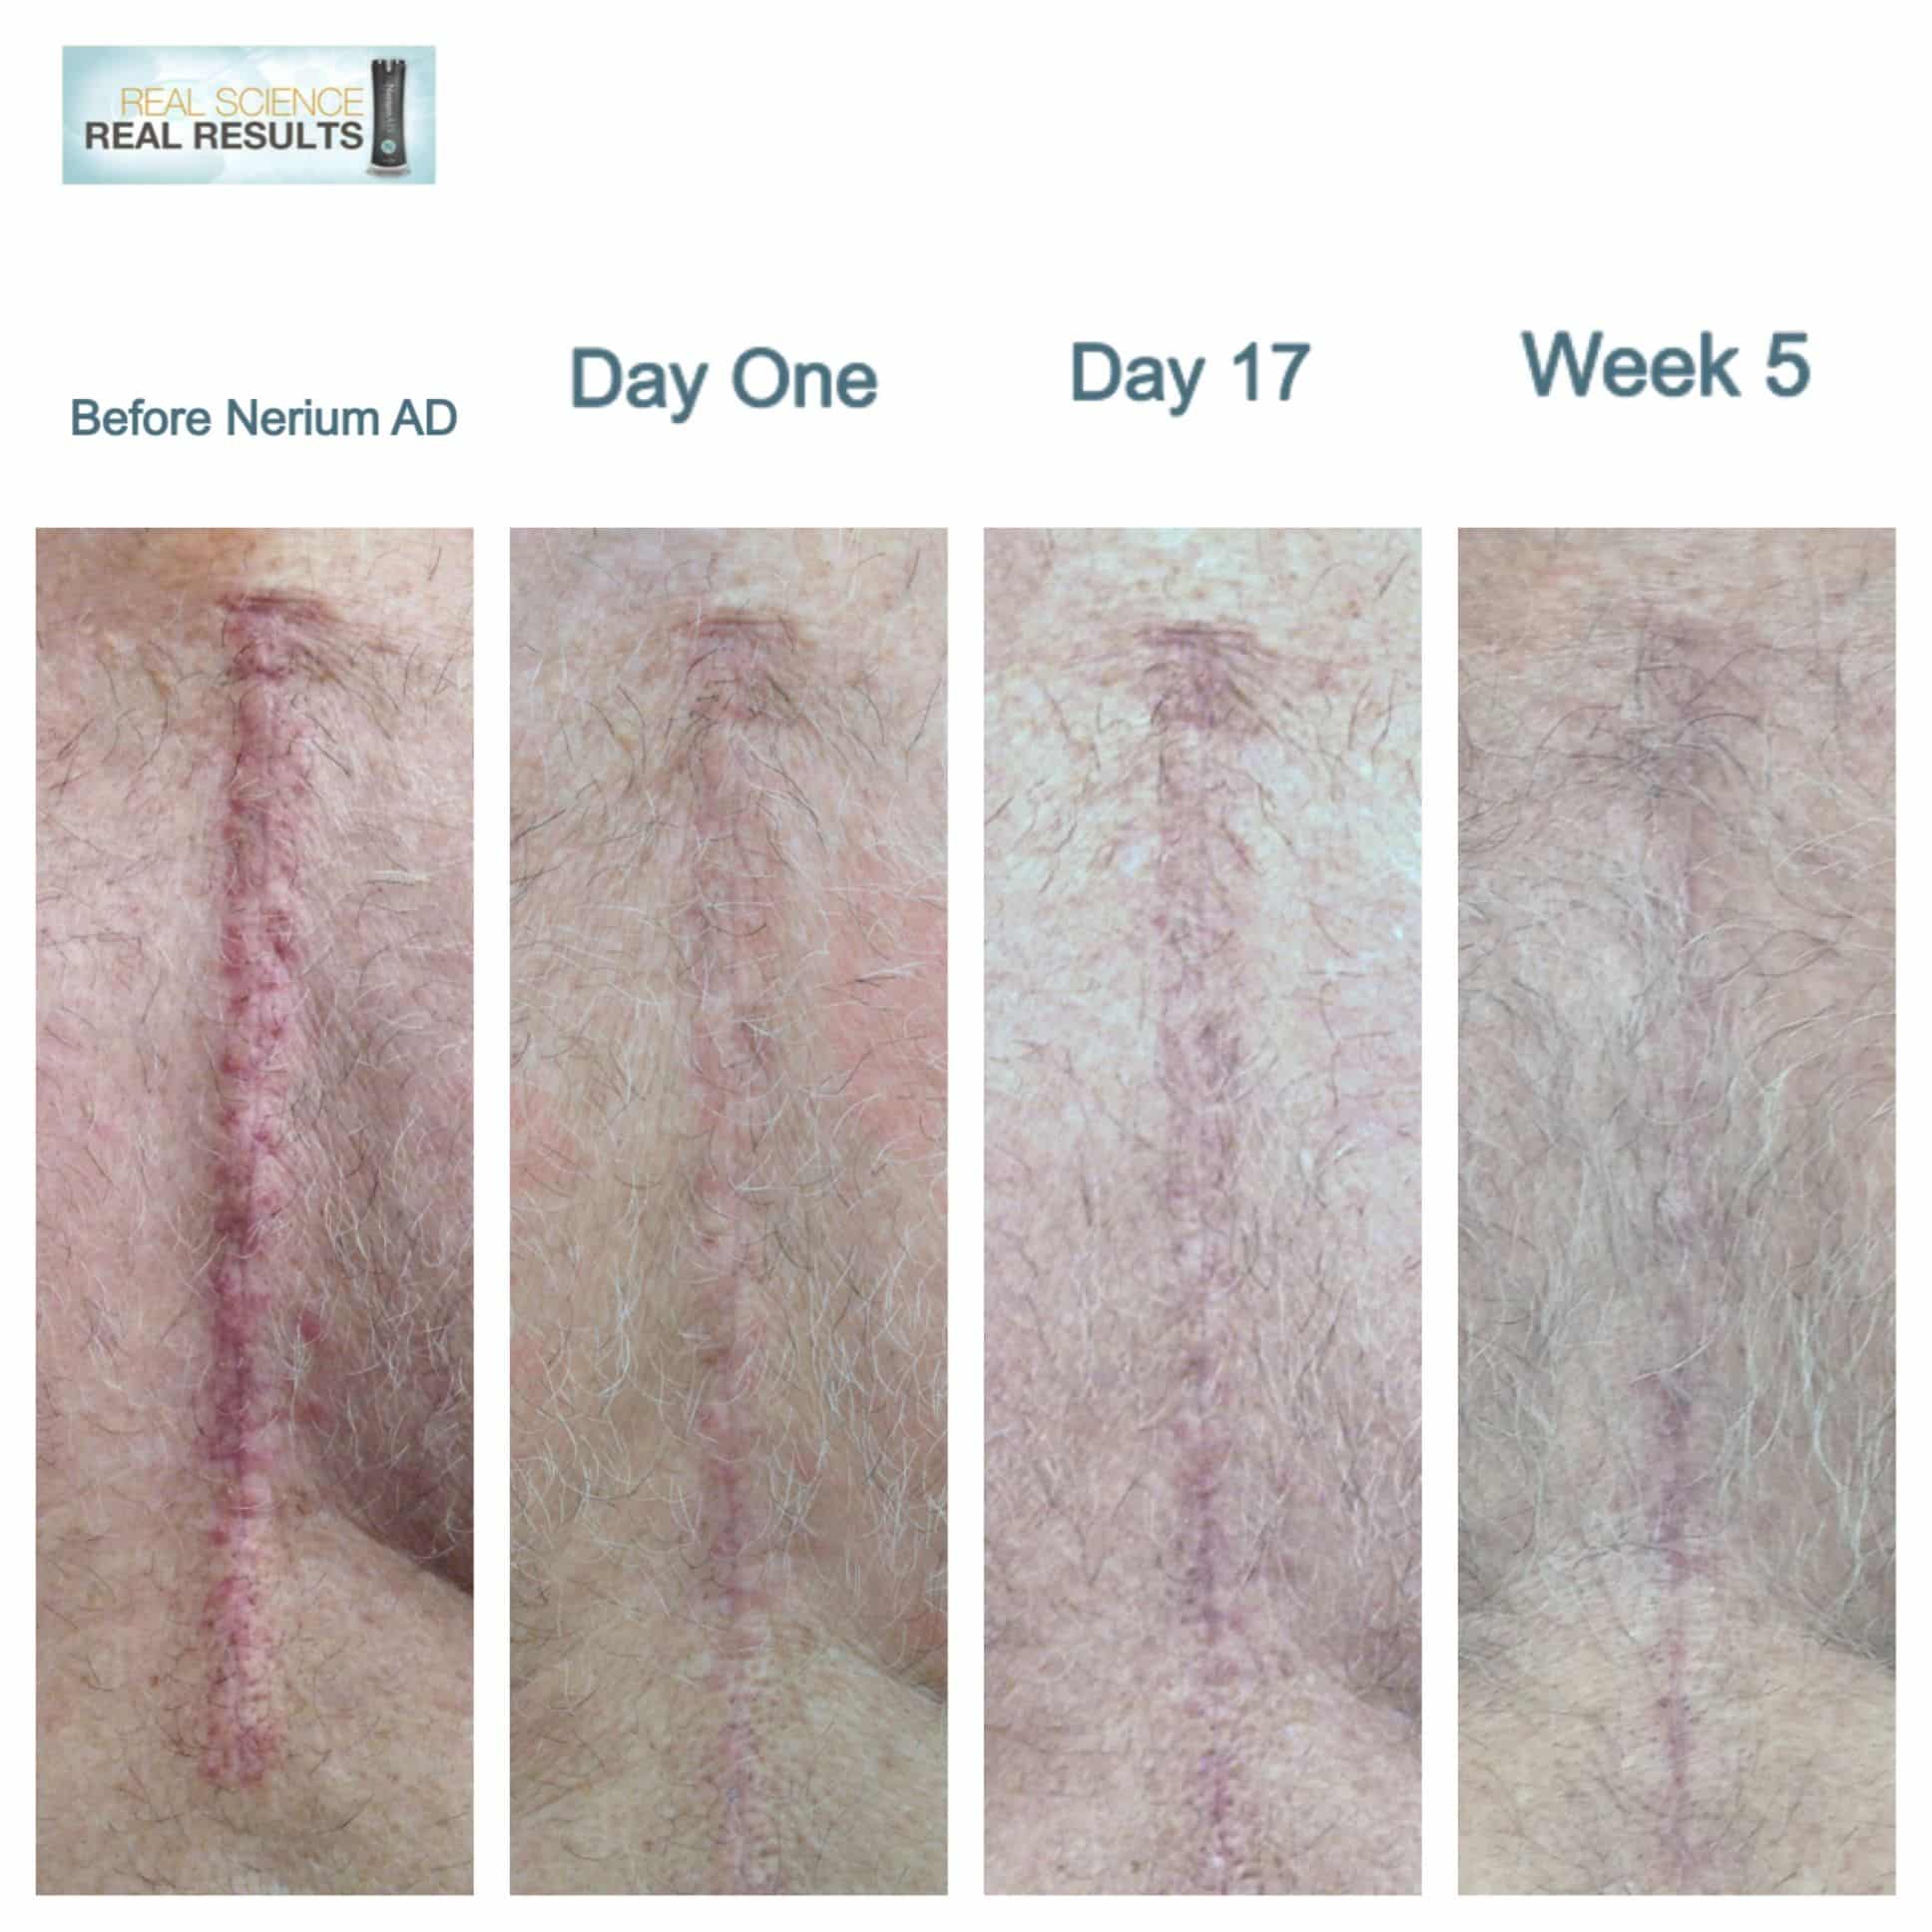 Open heart surgery scar vanishes with continued use of NeriumAD. Works ...